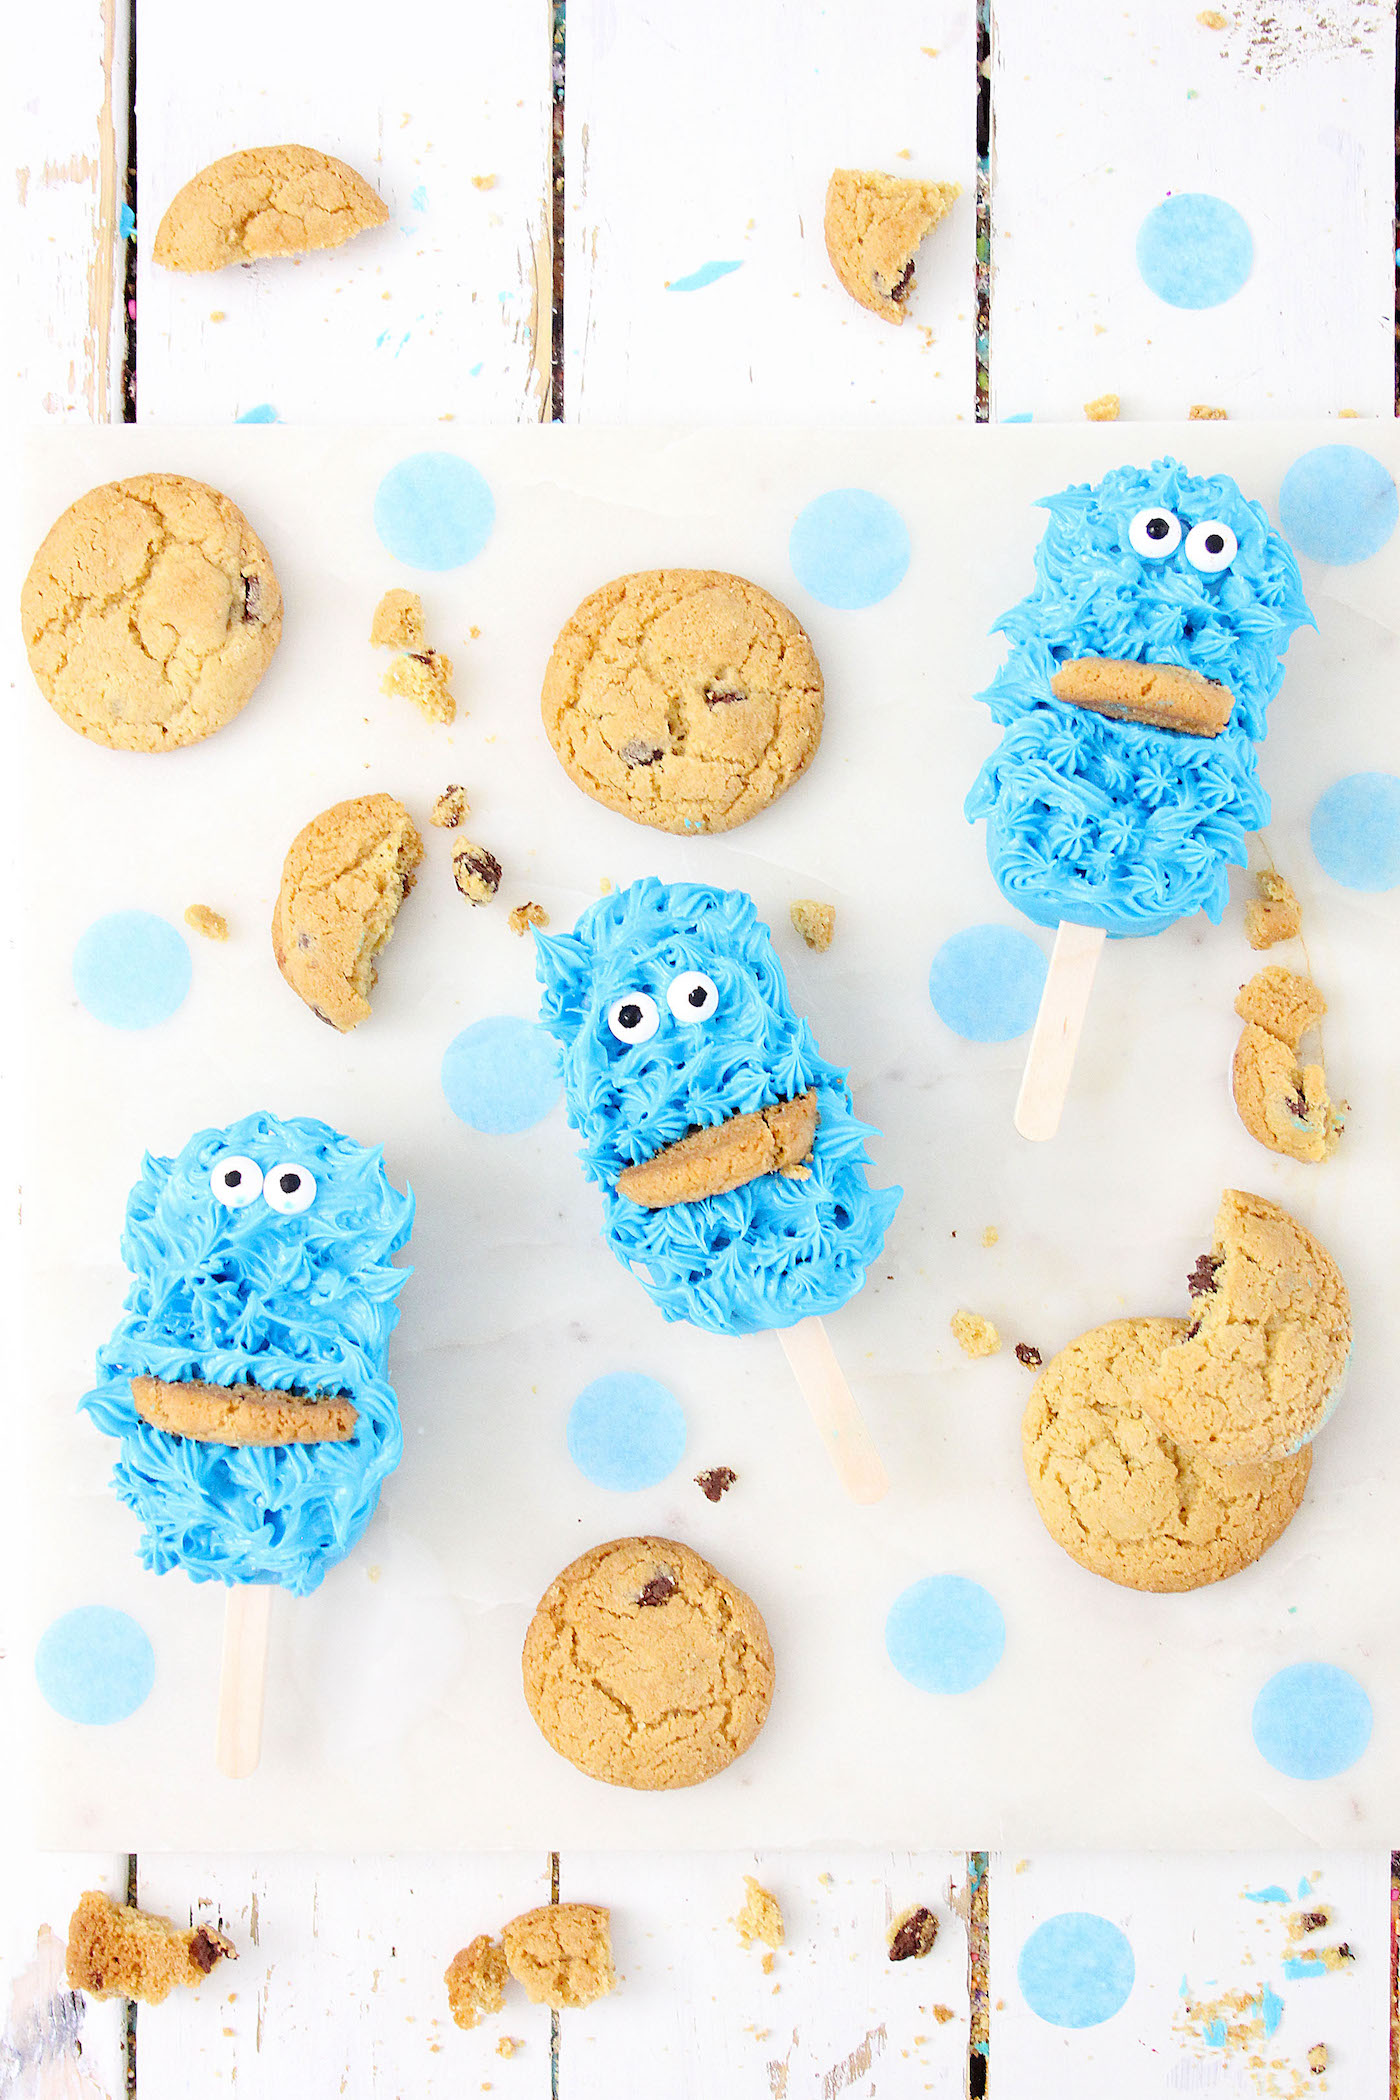 Delicious Cookie Monster cake popsicles for a Sesame Street party